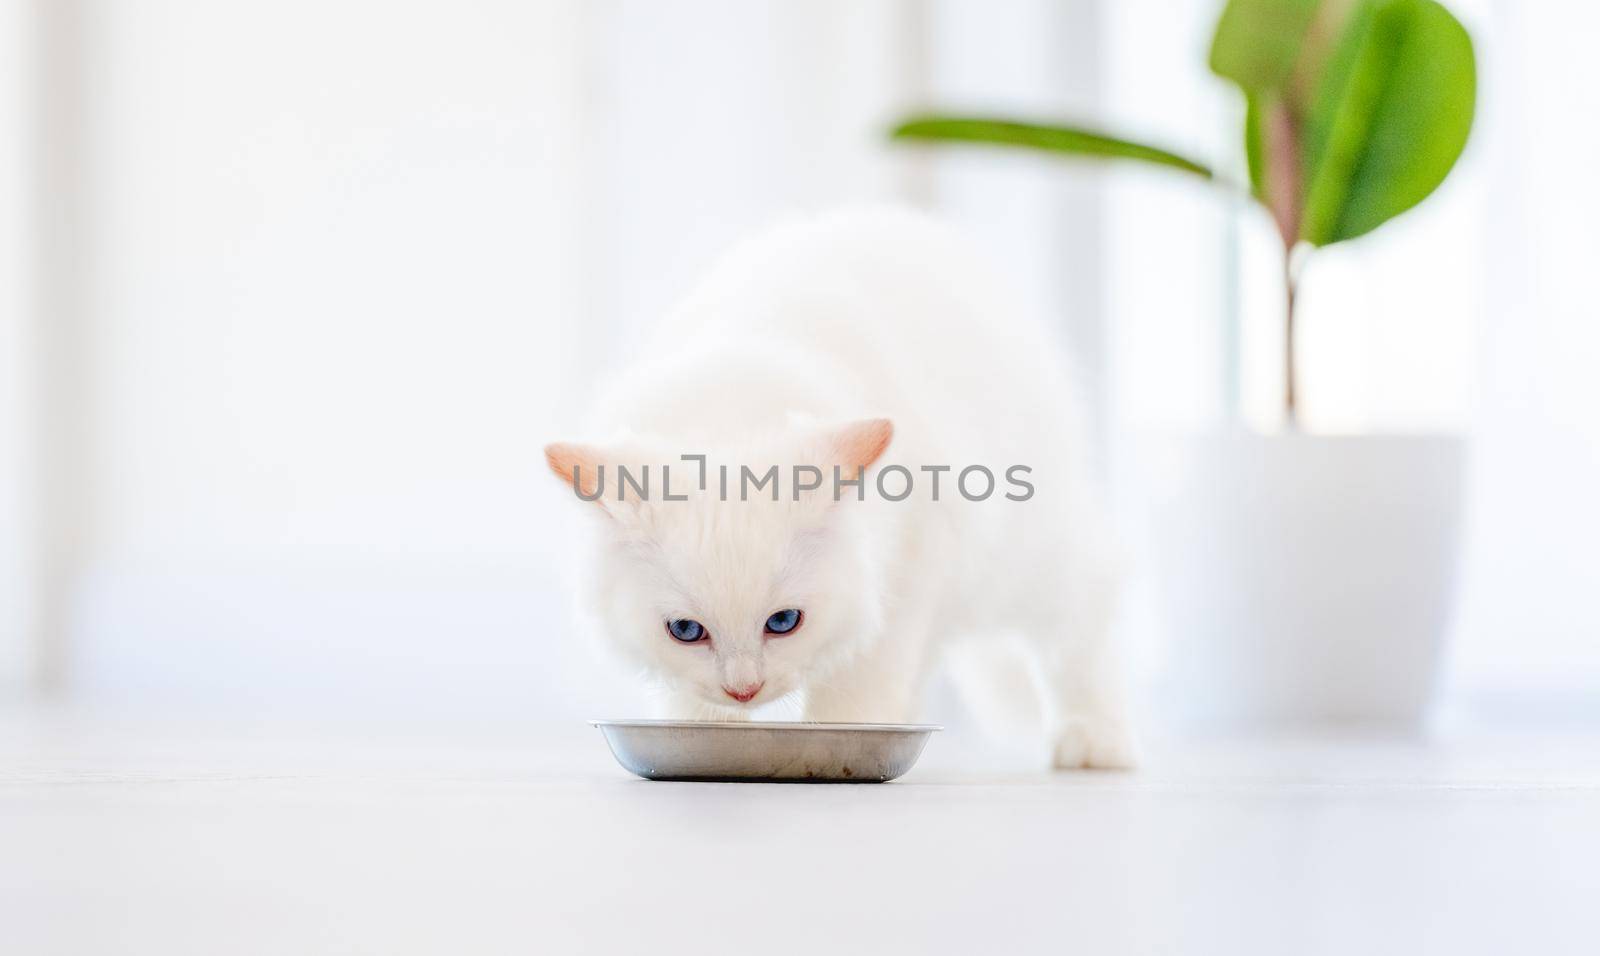 Lovely fluffy white ragdoll cat eating feed from bowl in light room and looking at camera with beautiful eyes. Beautiful purebred feline pet outdoors with food